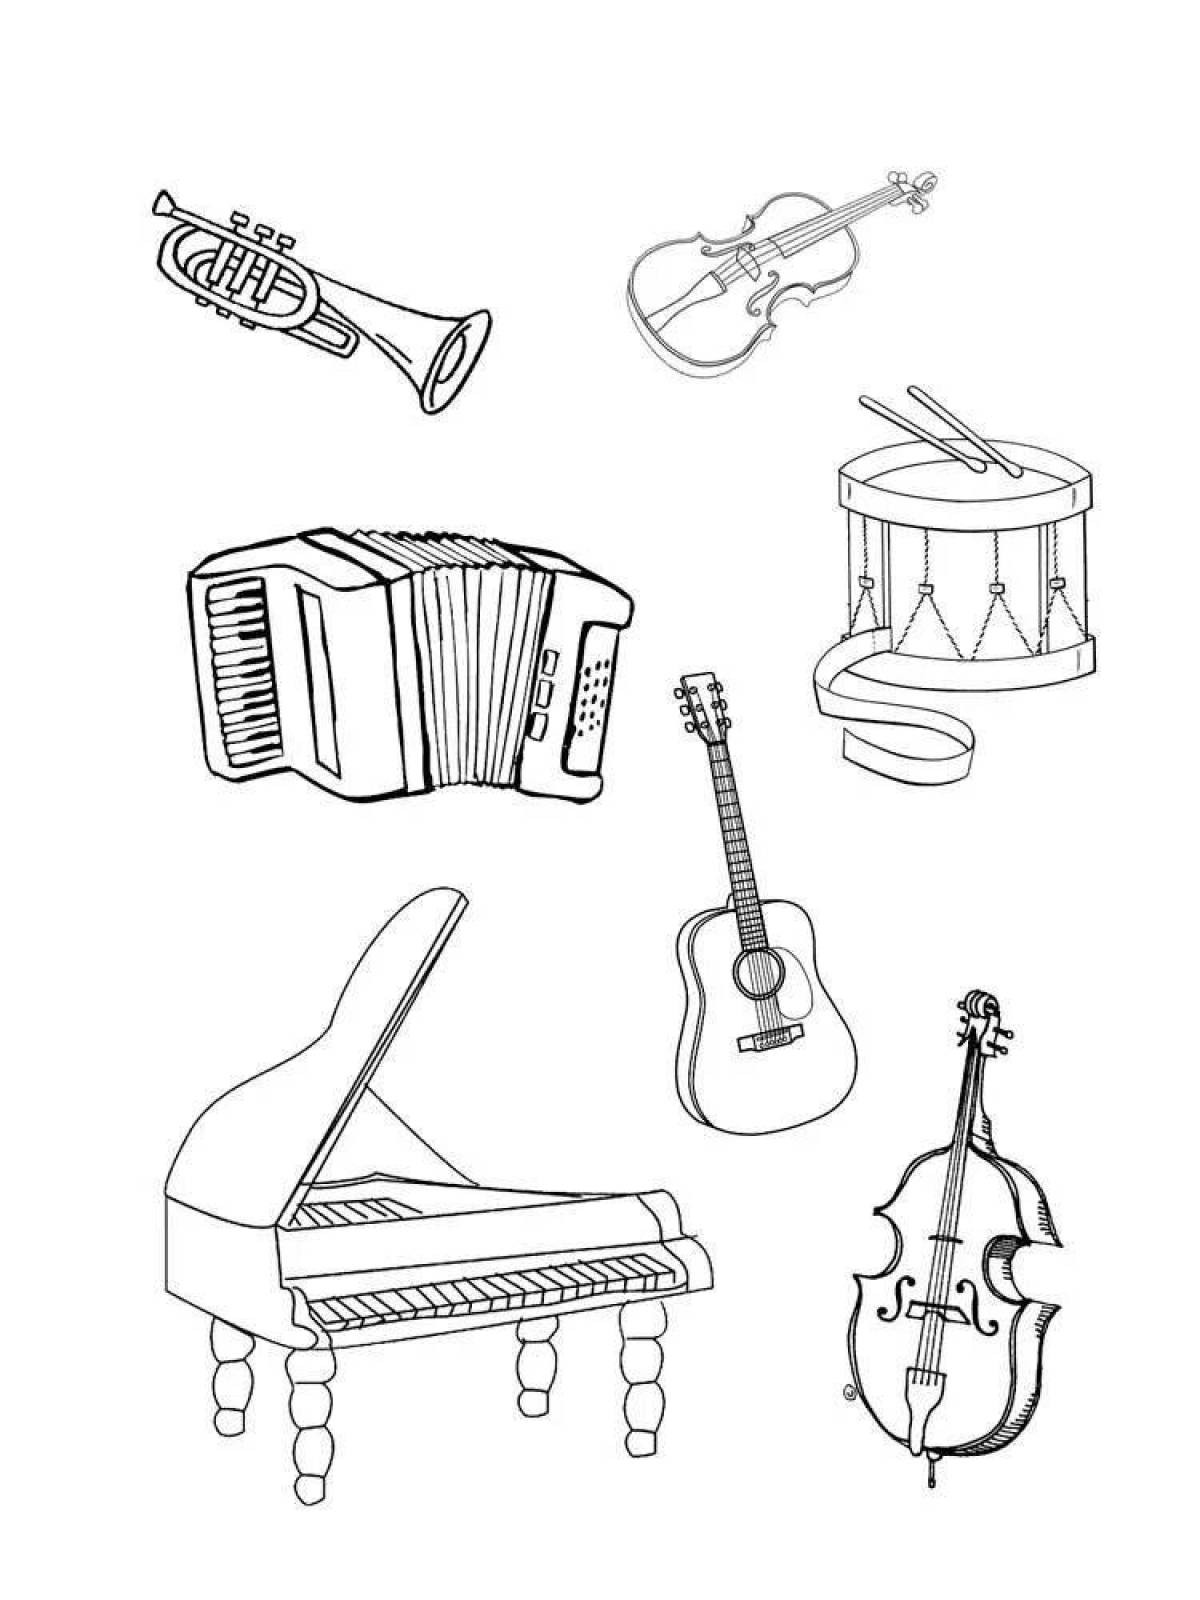 Musical instruments for children 6 7 years old #31